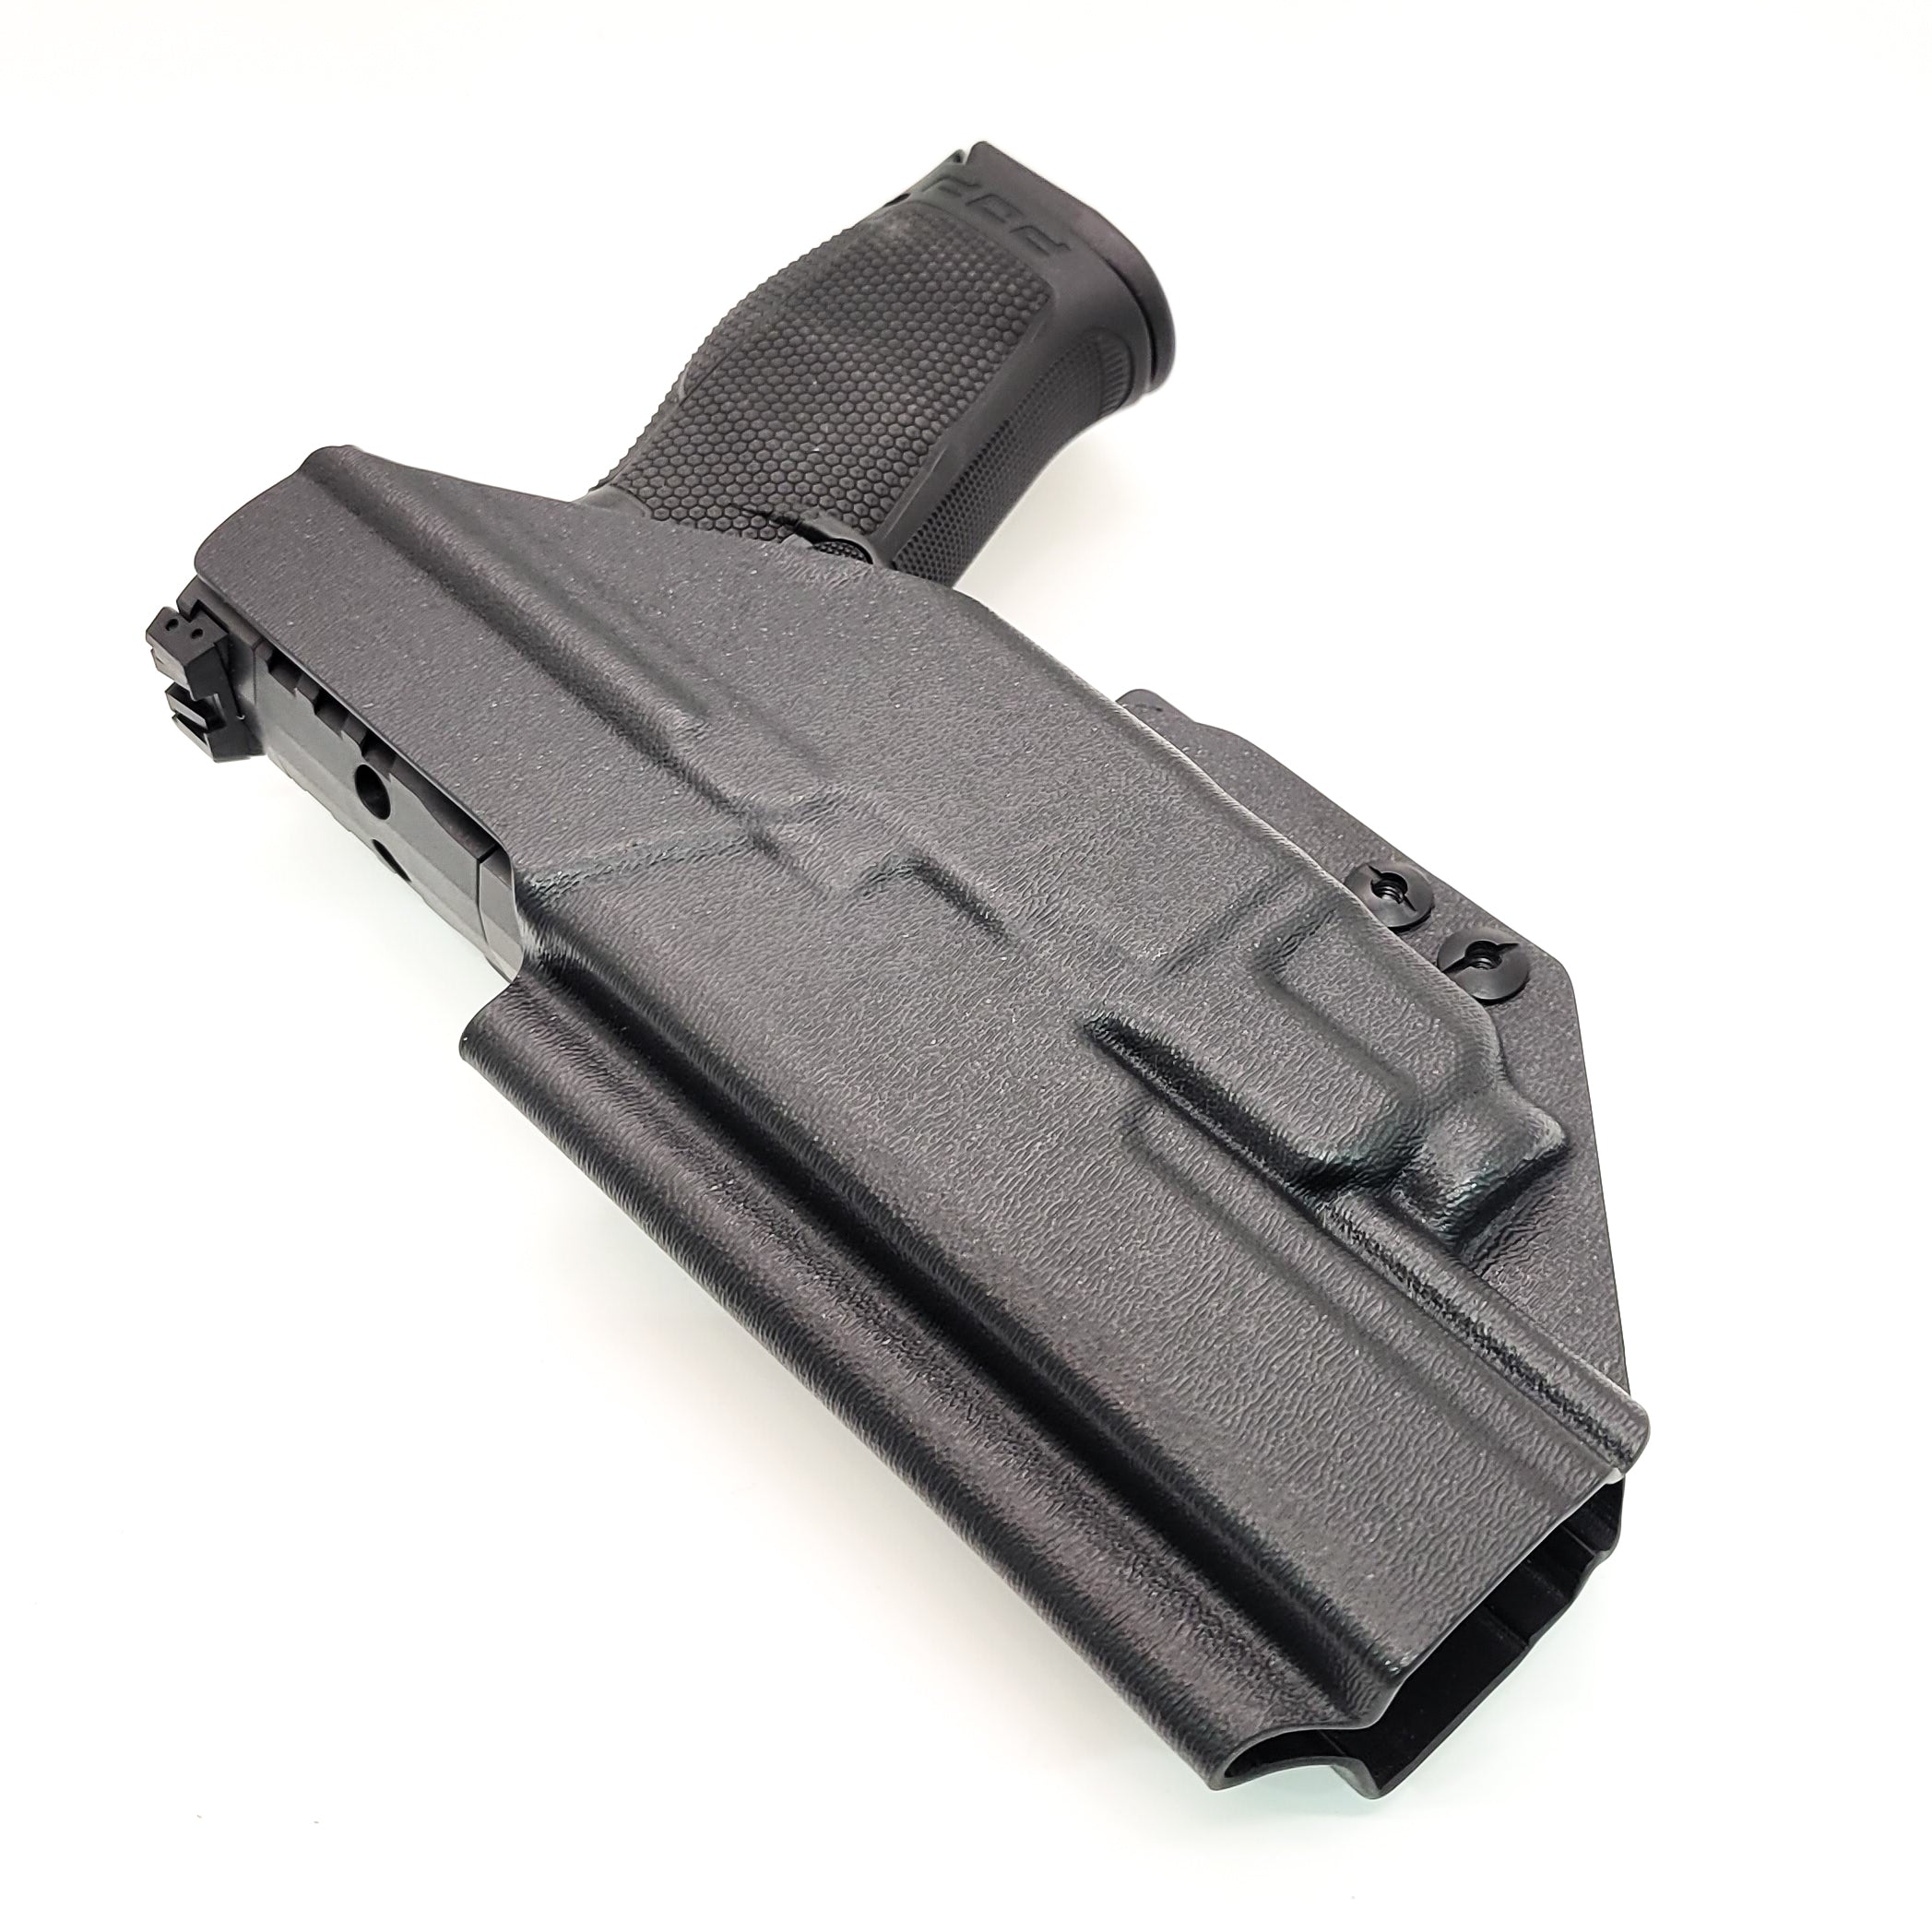 For the best concealed carry Inside Waistband IWB AIWB Holster designed to fit the Walther PDP Pro SD 4.5" pistol with Streamlight TLR-7A or TLR-7 on the firearm, shop Four Brothers Holsters. Cut for red dot sight, full sweat guard, adjustable retention & open muzzle for threaded barrels & compensators. TLR7 ProSD